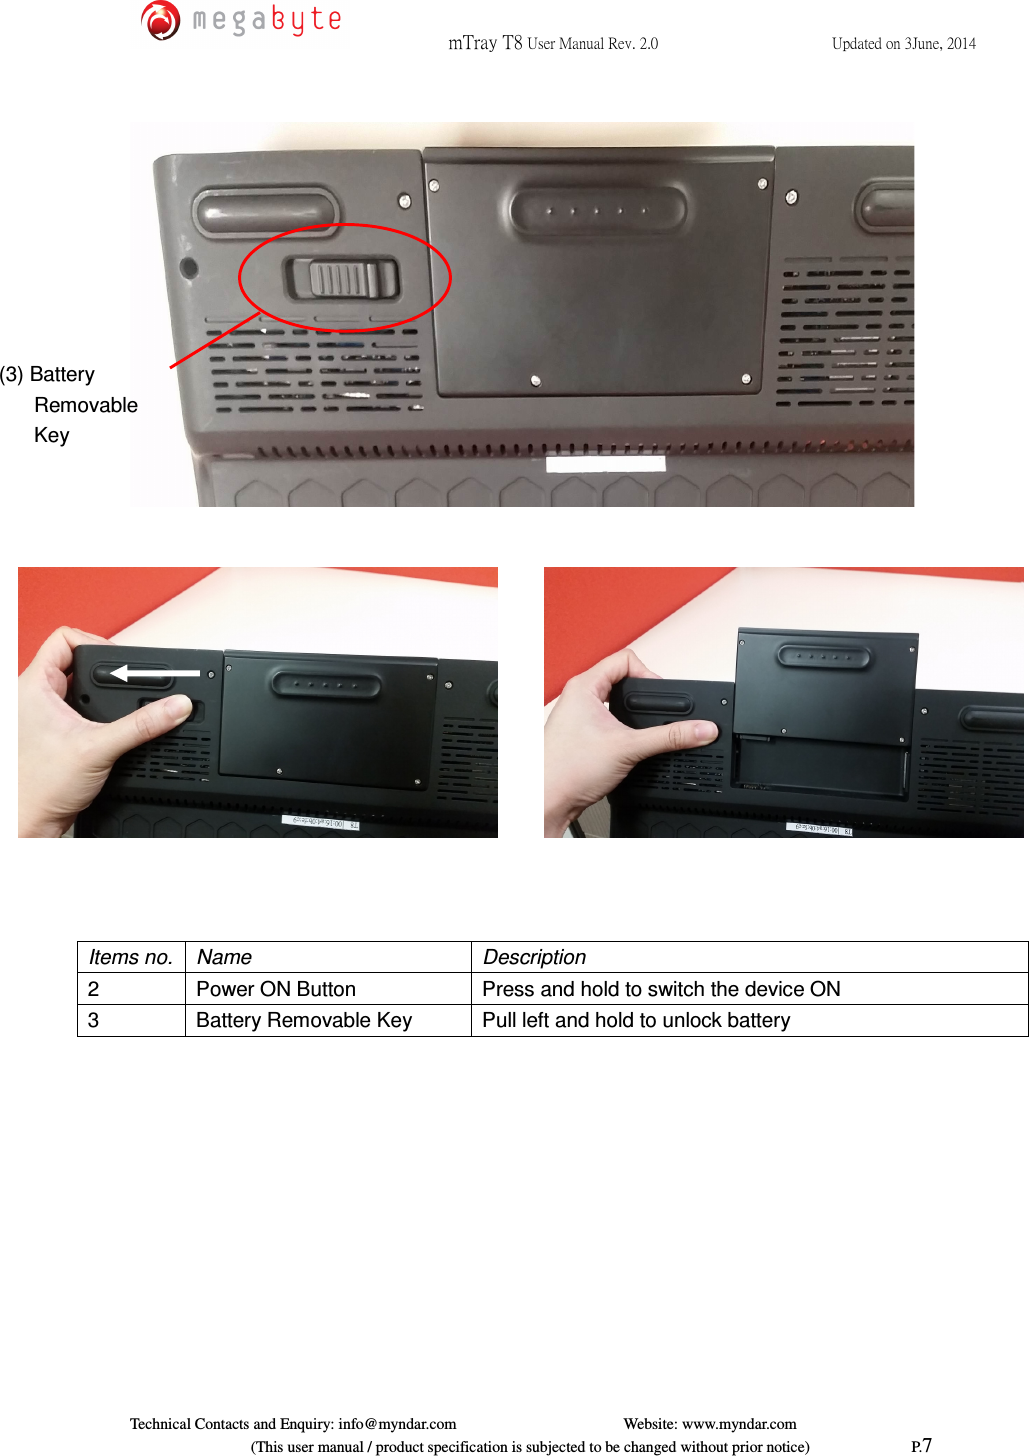  mTray T8 User Manual Rev. 2.0  Updated on 3June, 2014     Technical Contacts and Enquiry: info@myndar.com         Website: www.myndar.com                             (This user manual / product specification is subjected to be changed without prior notice)                          P.7          Items no.  Name  Description 2  Power ON Button  Press and hold to switch the device ON 3  Battery Removable Key  Pull left and hold to unlock battery  (3) Battery Removable  Key 